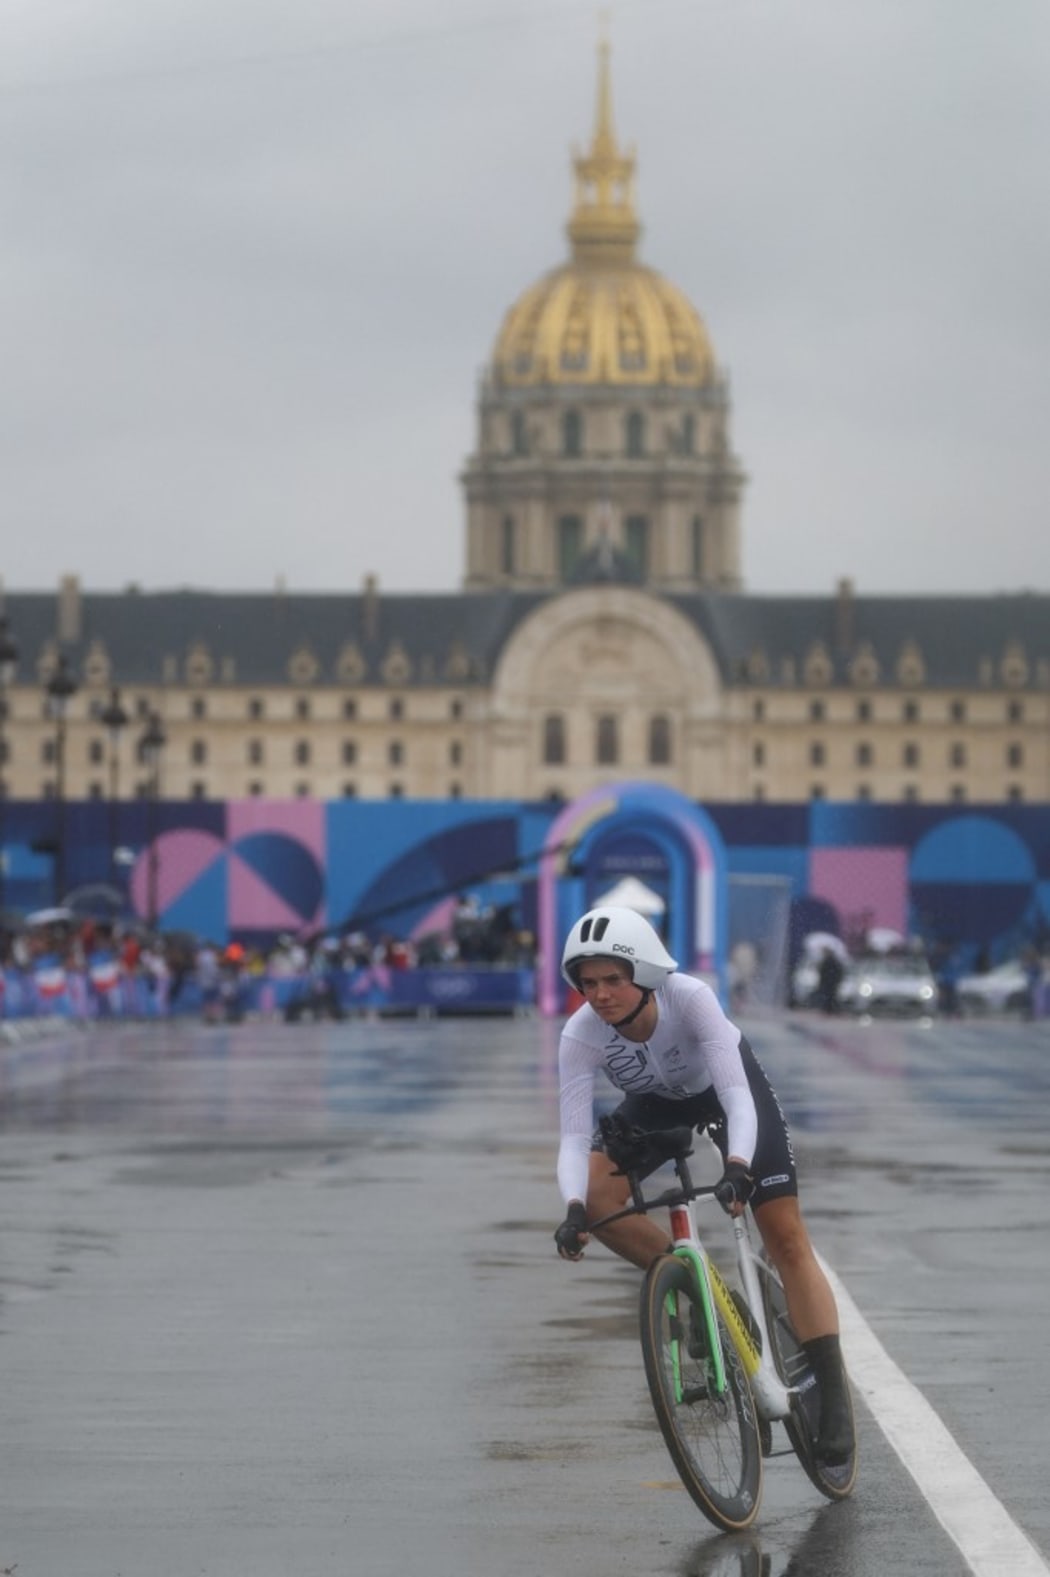 New Zealand's Kim Cadzow cycles at the start at Invalides as she competes in the women's road cycling individual time trial during the Paris 2024 Olympic Games in Paris, on July 27, 2024. (Photo by Emmanuel DUNAND / AFP)